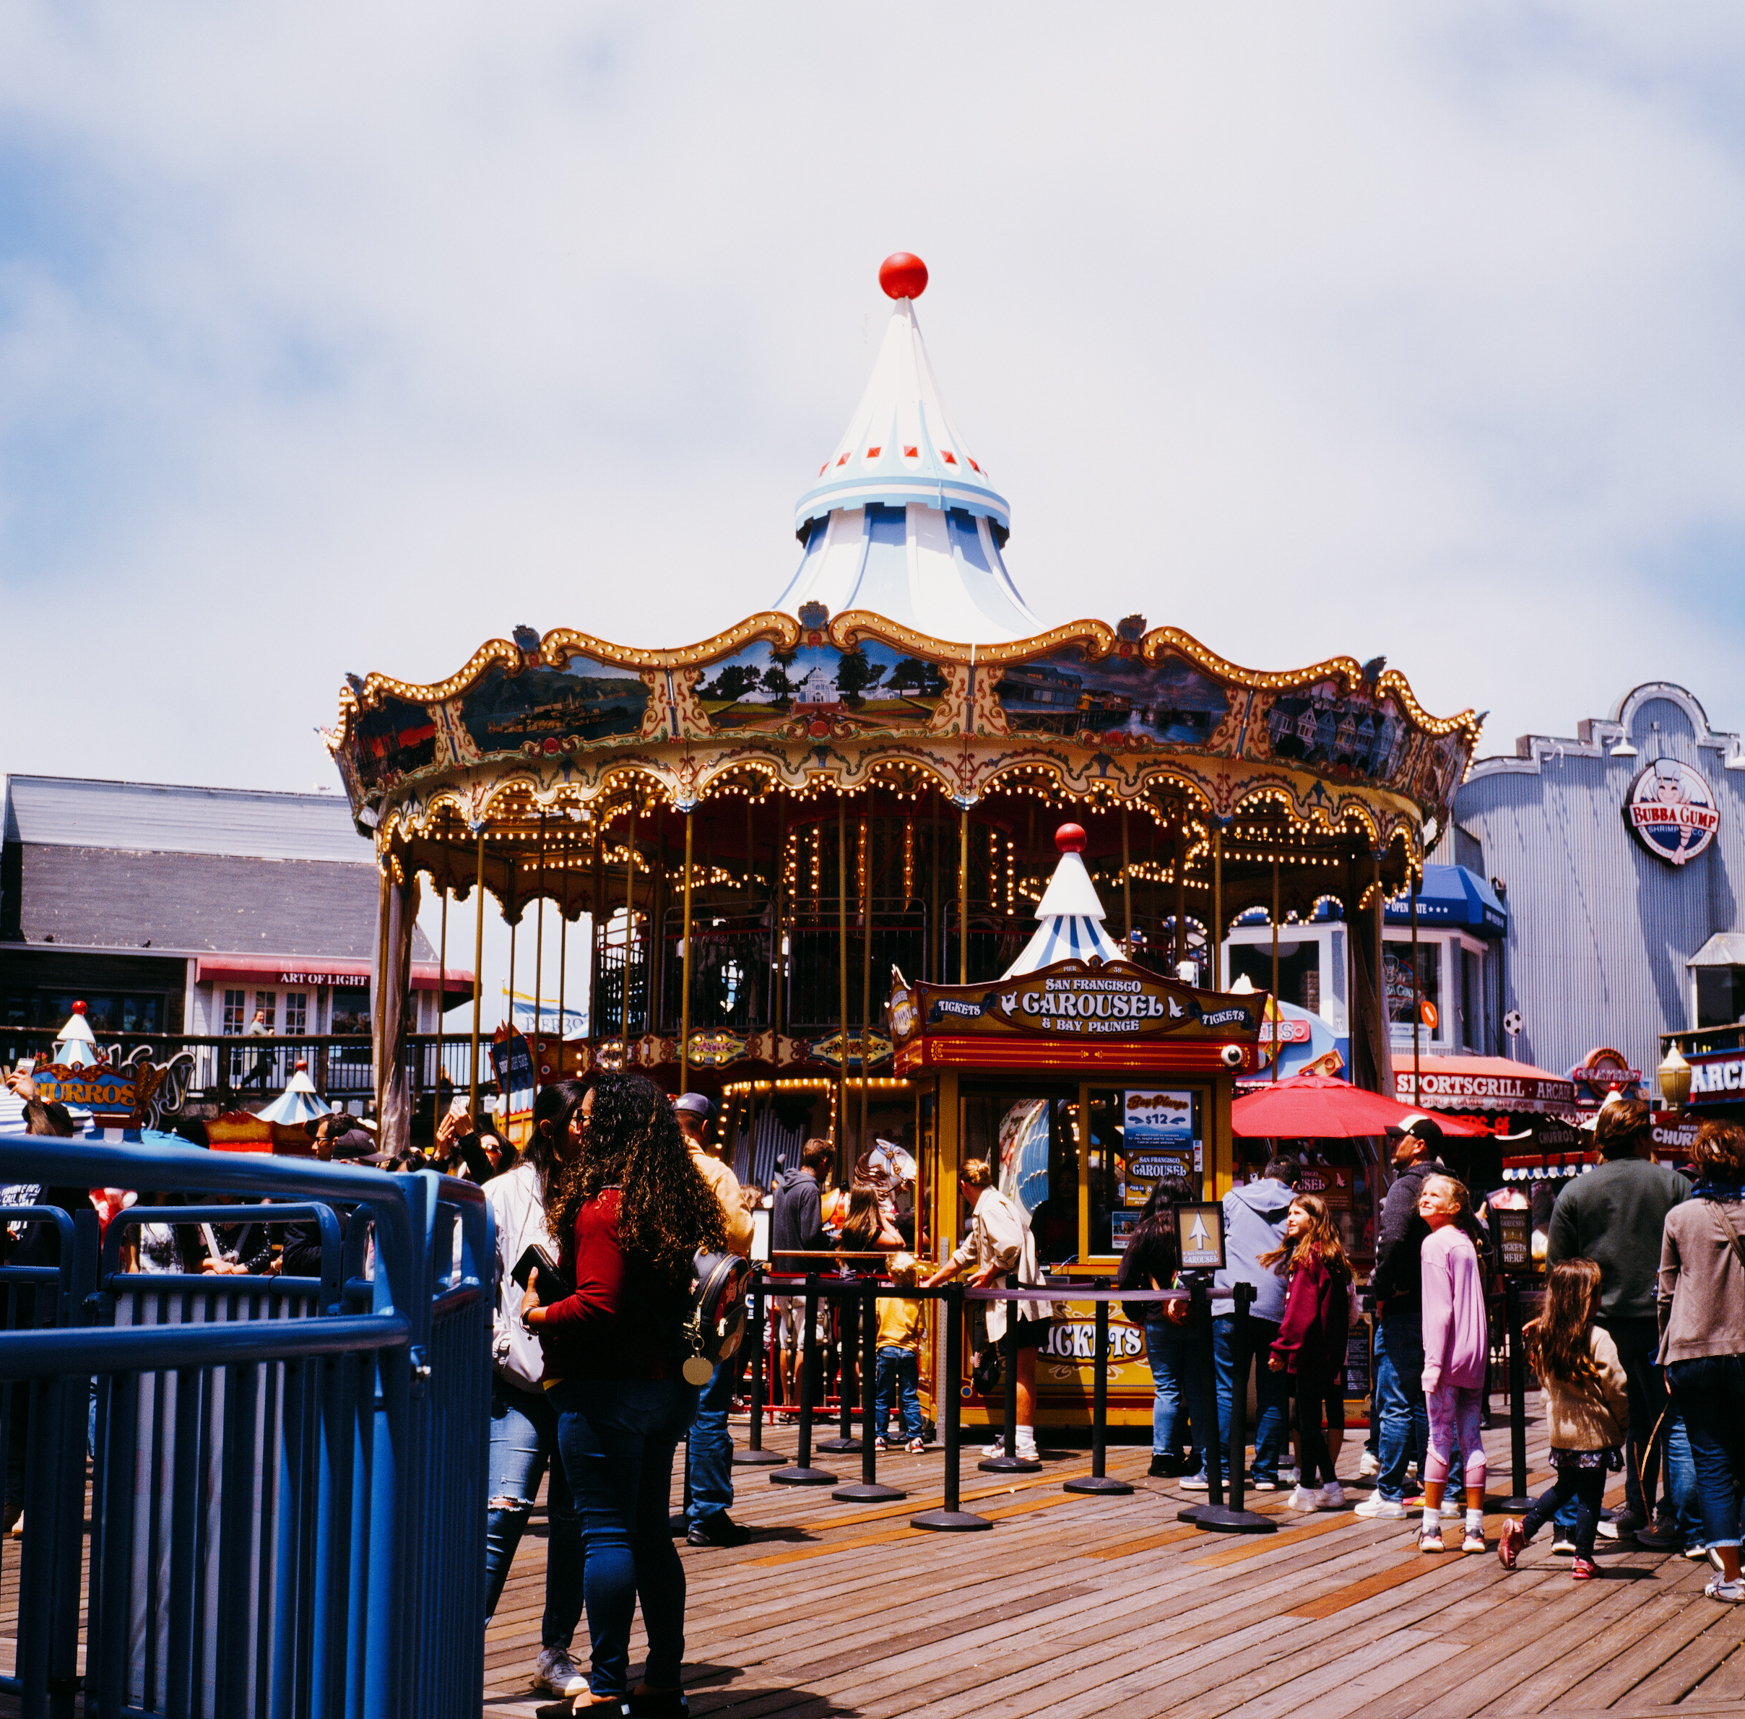 a scan of a color slide photo of a tourist atraction in san francisco. many people are standing in line for the carousel ride